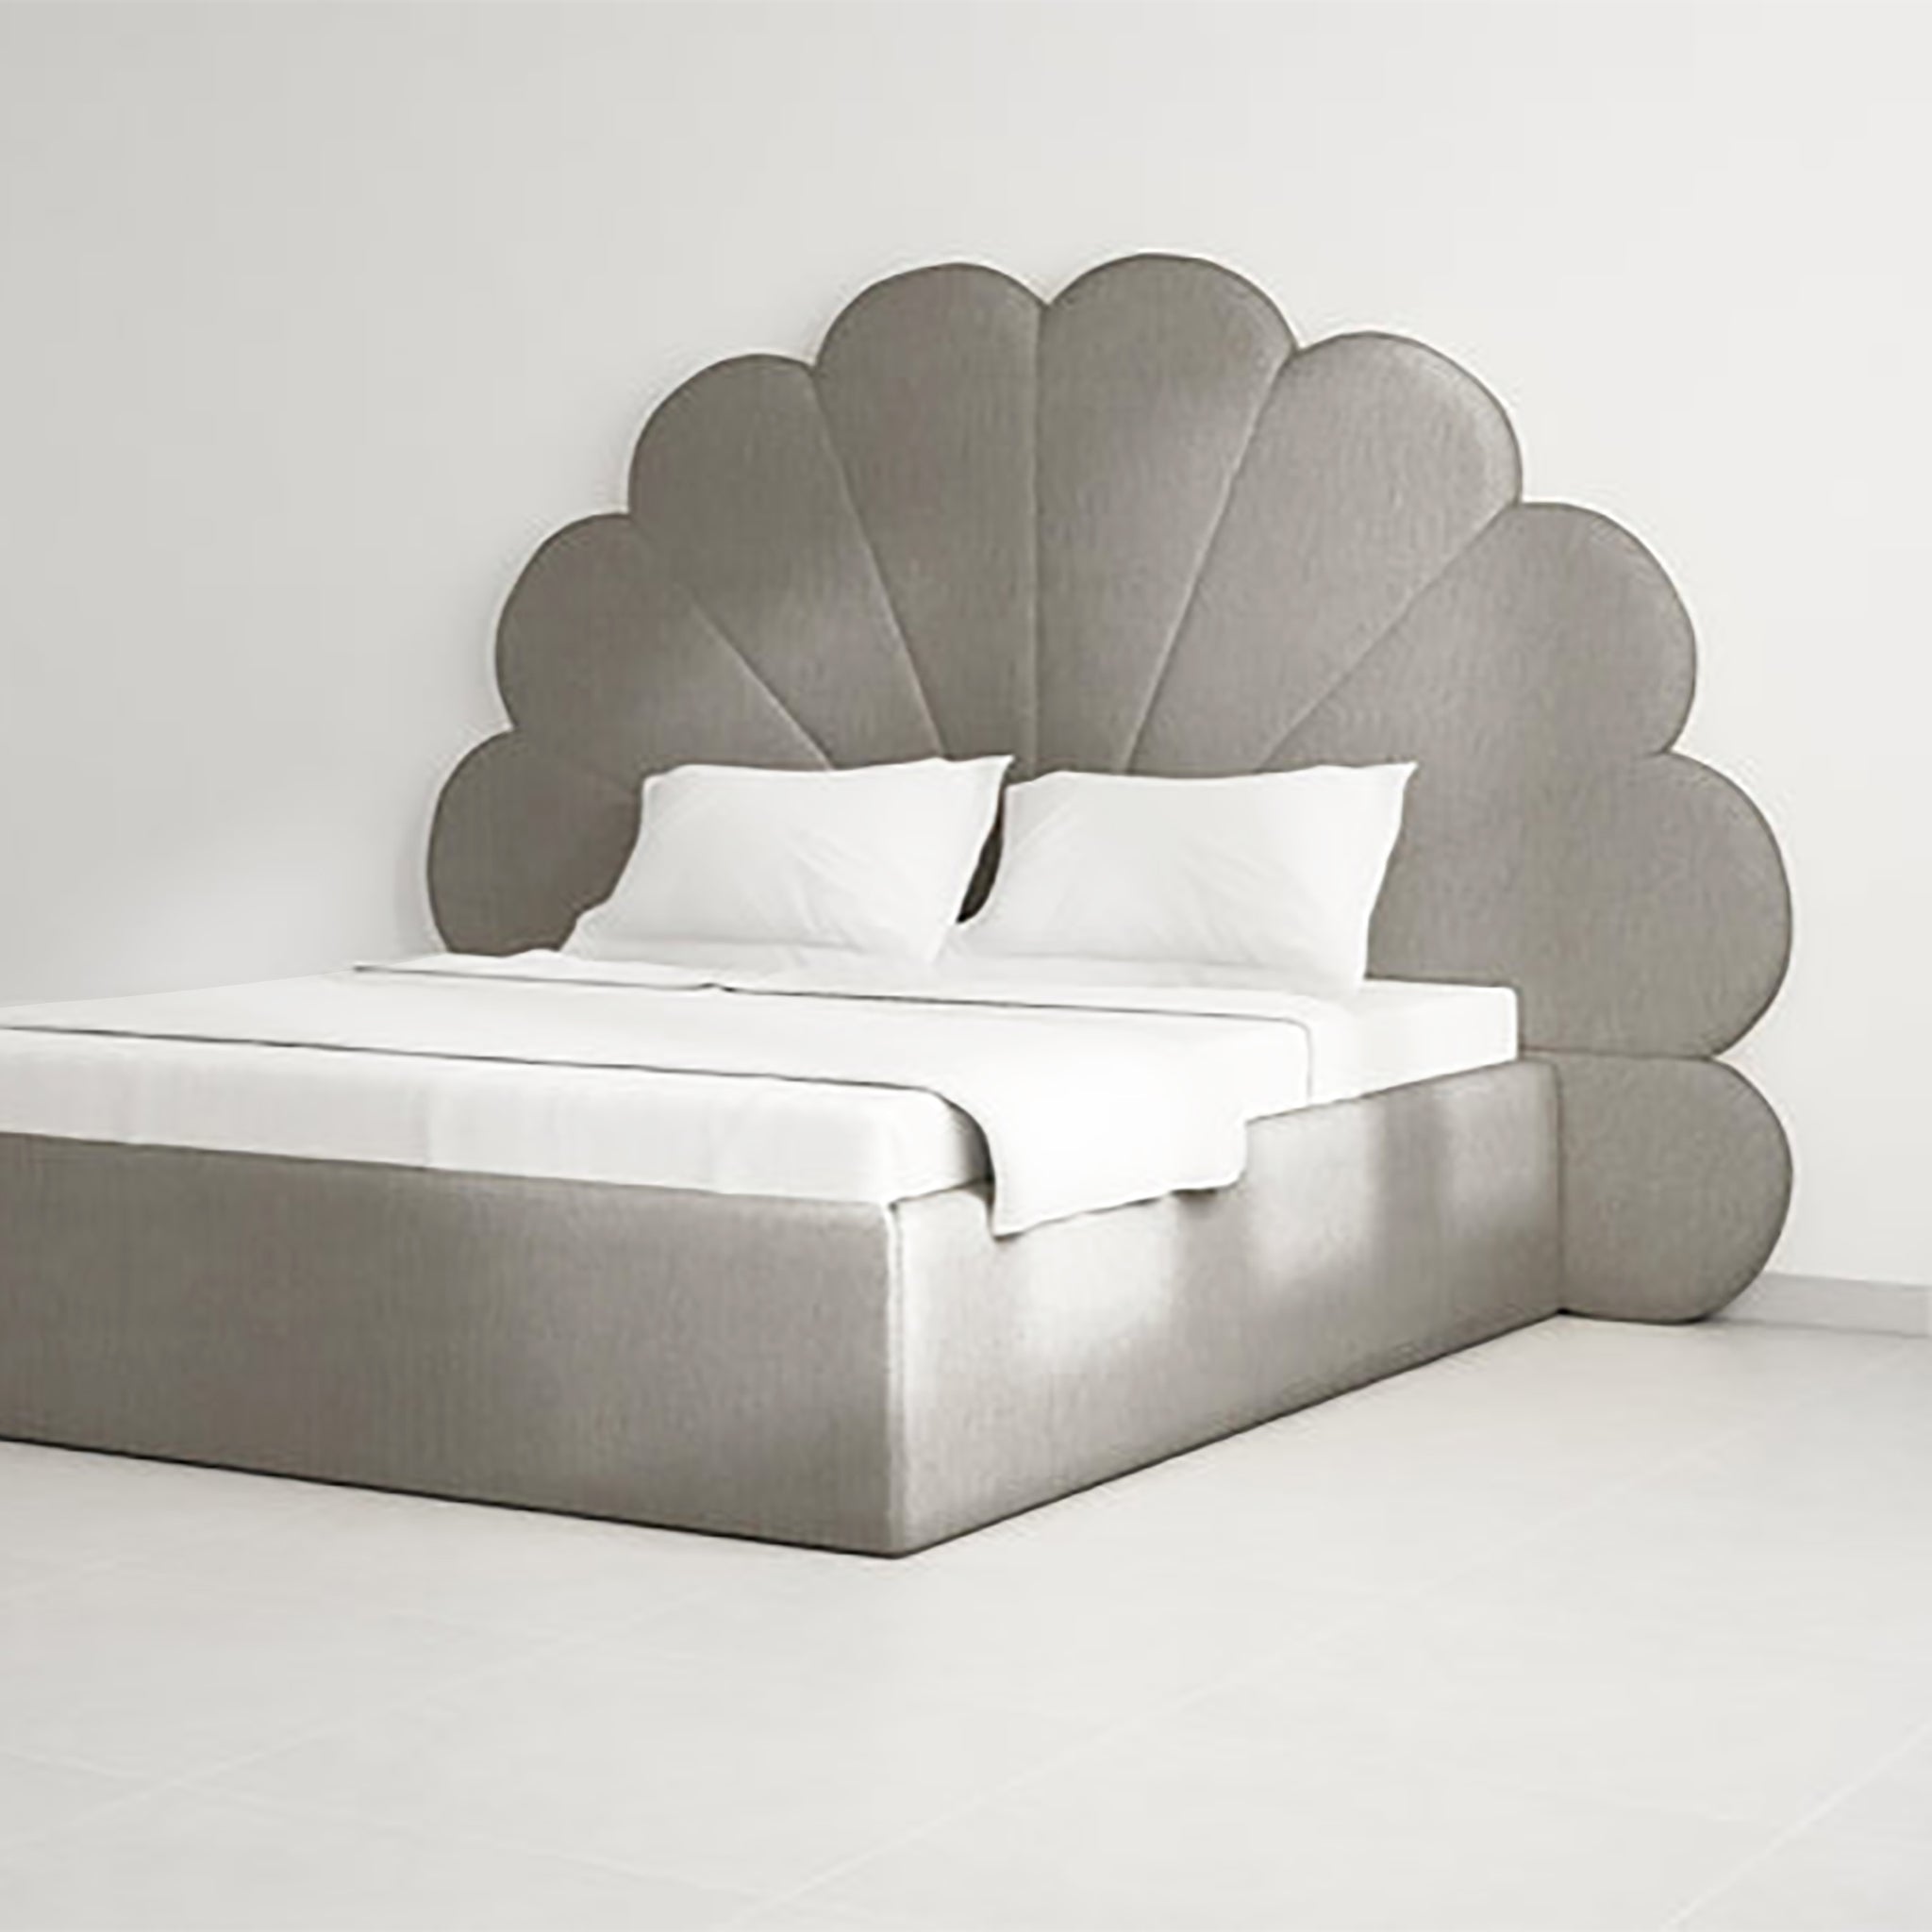 The Kyle Bed with superior craftsmanship and style